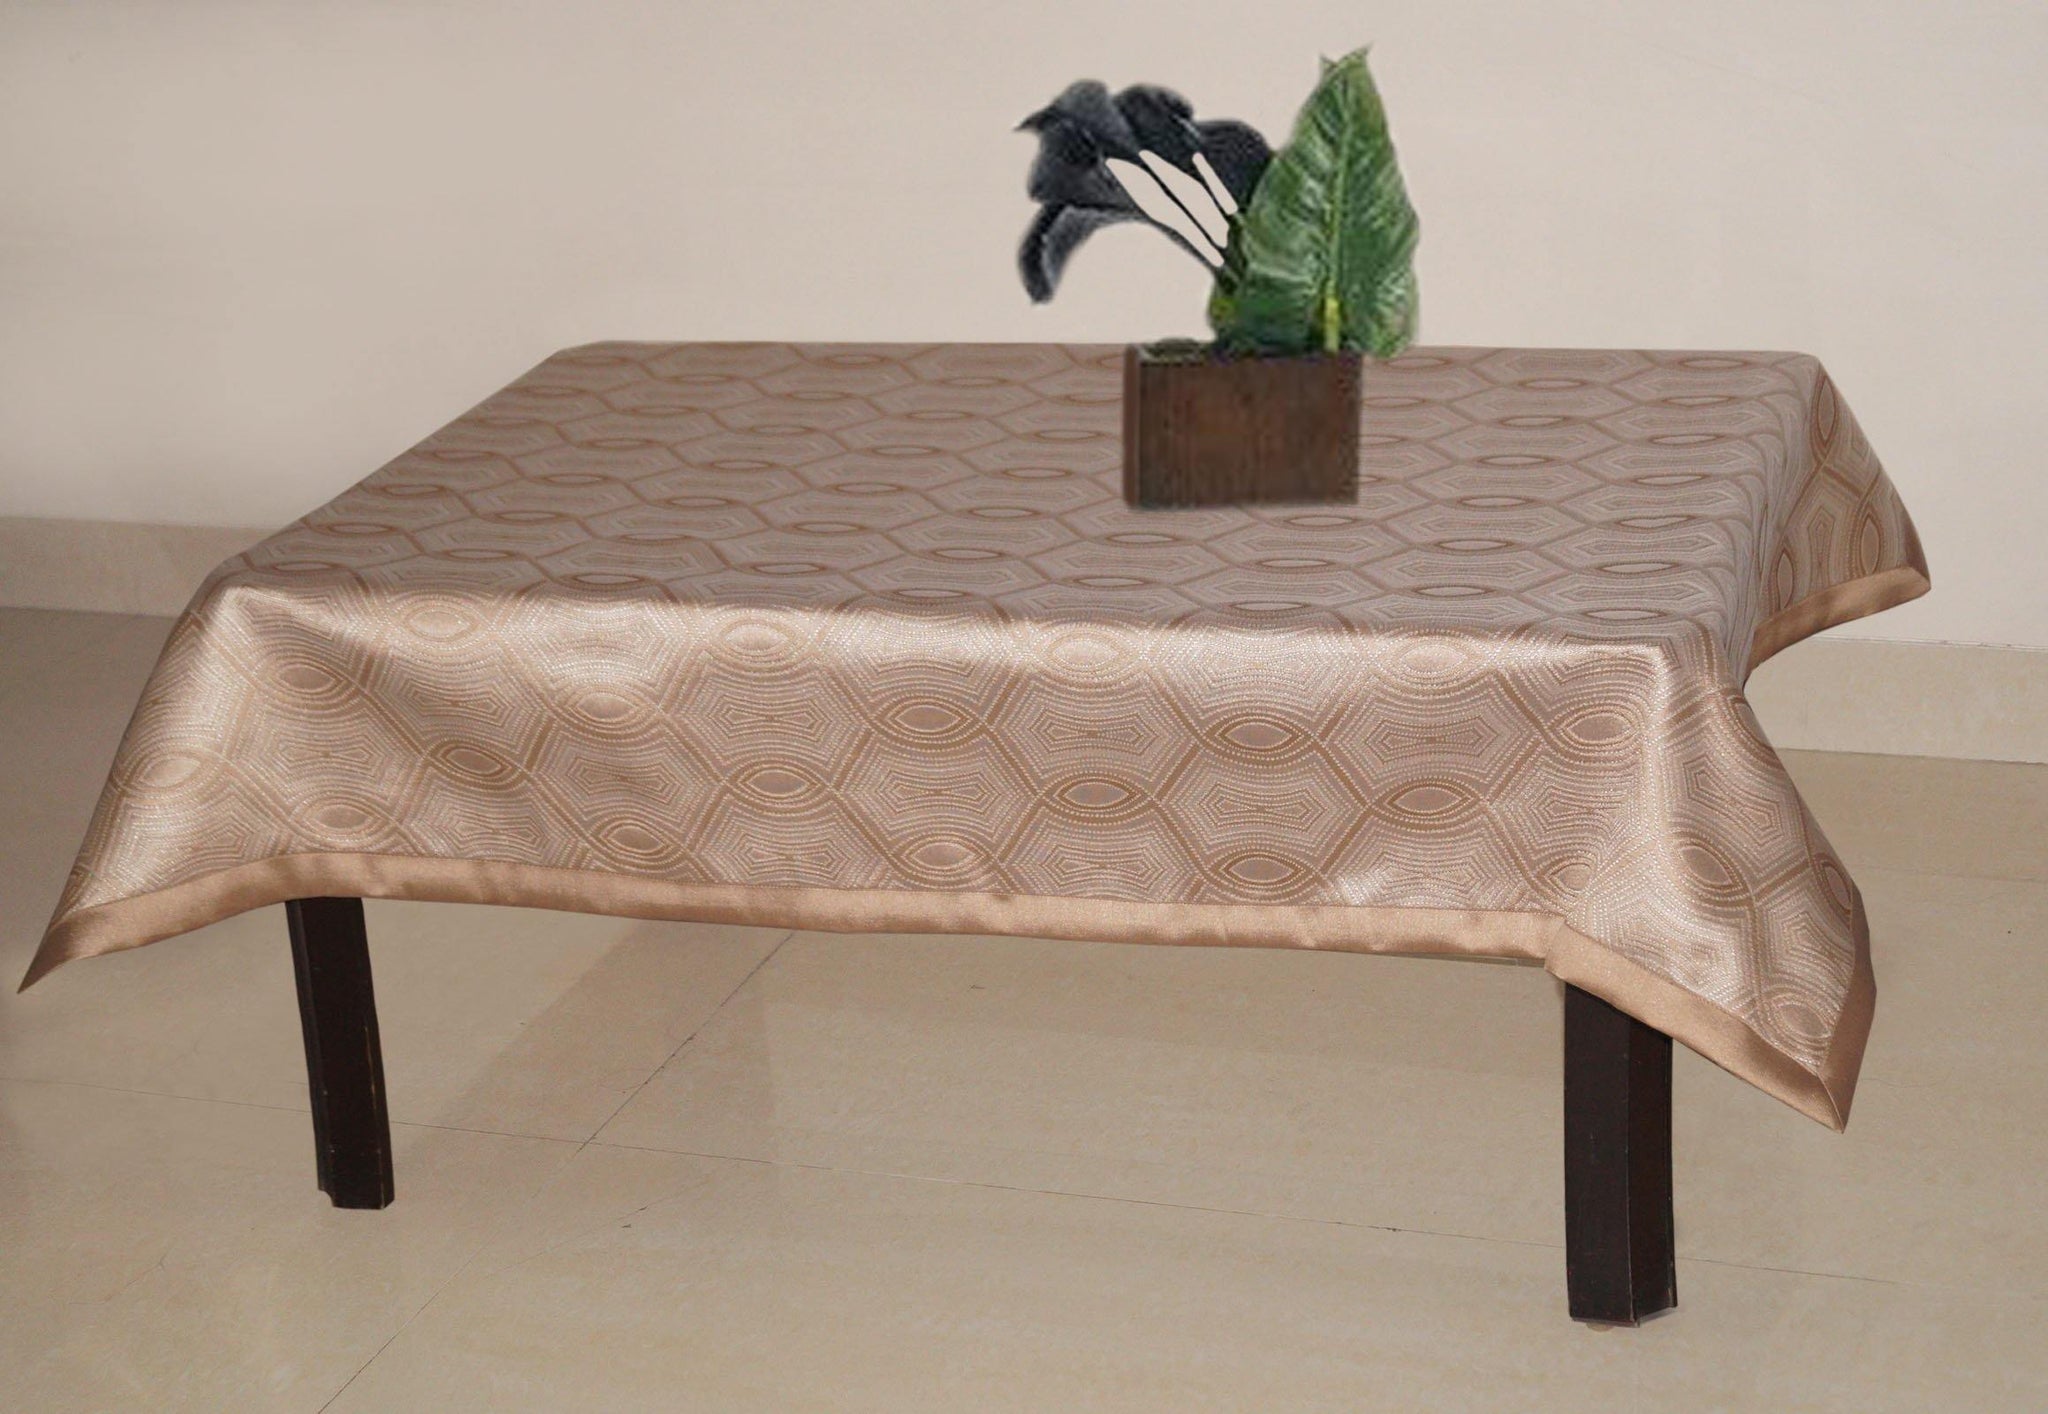 Lushomes Natural 1 Selfdesign Jaquard Centre Table Cloth (Size: 36x60 inches), single pc - Lushomes